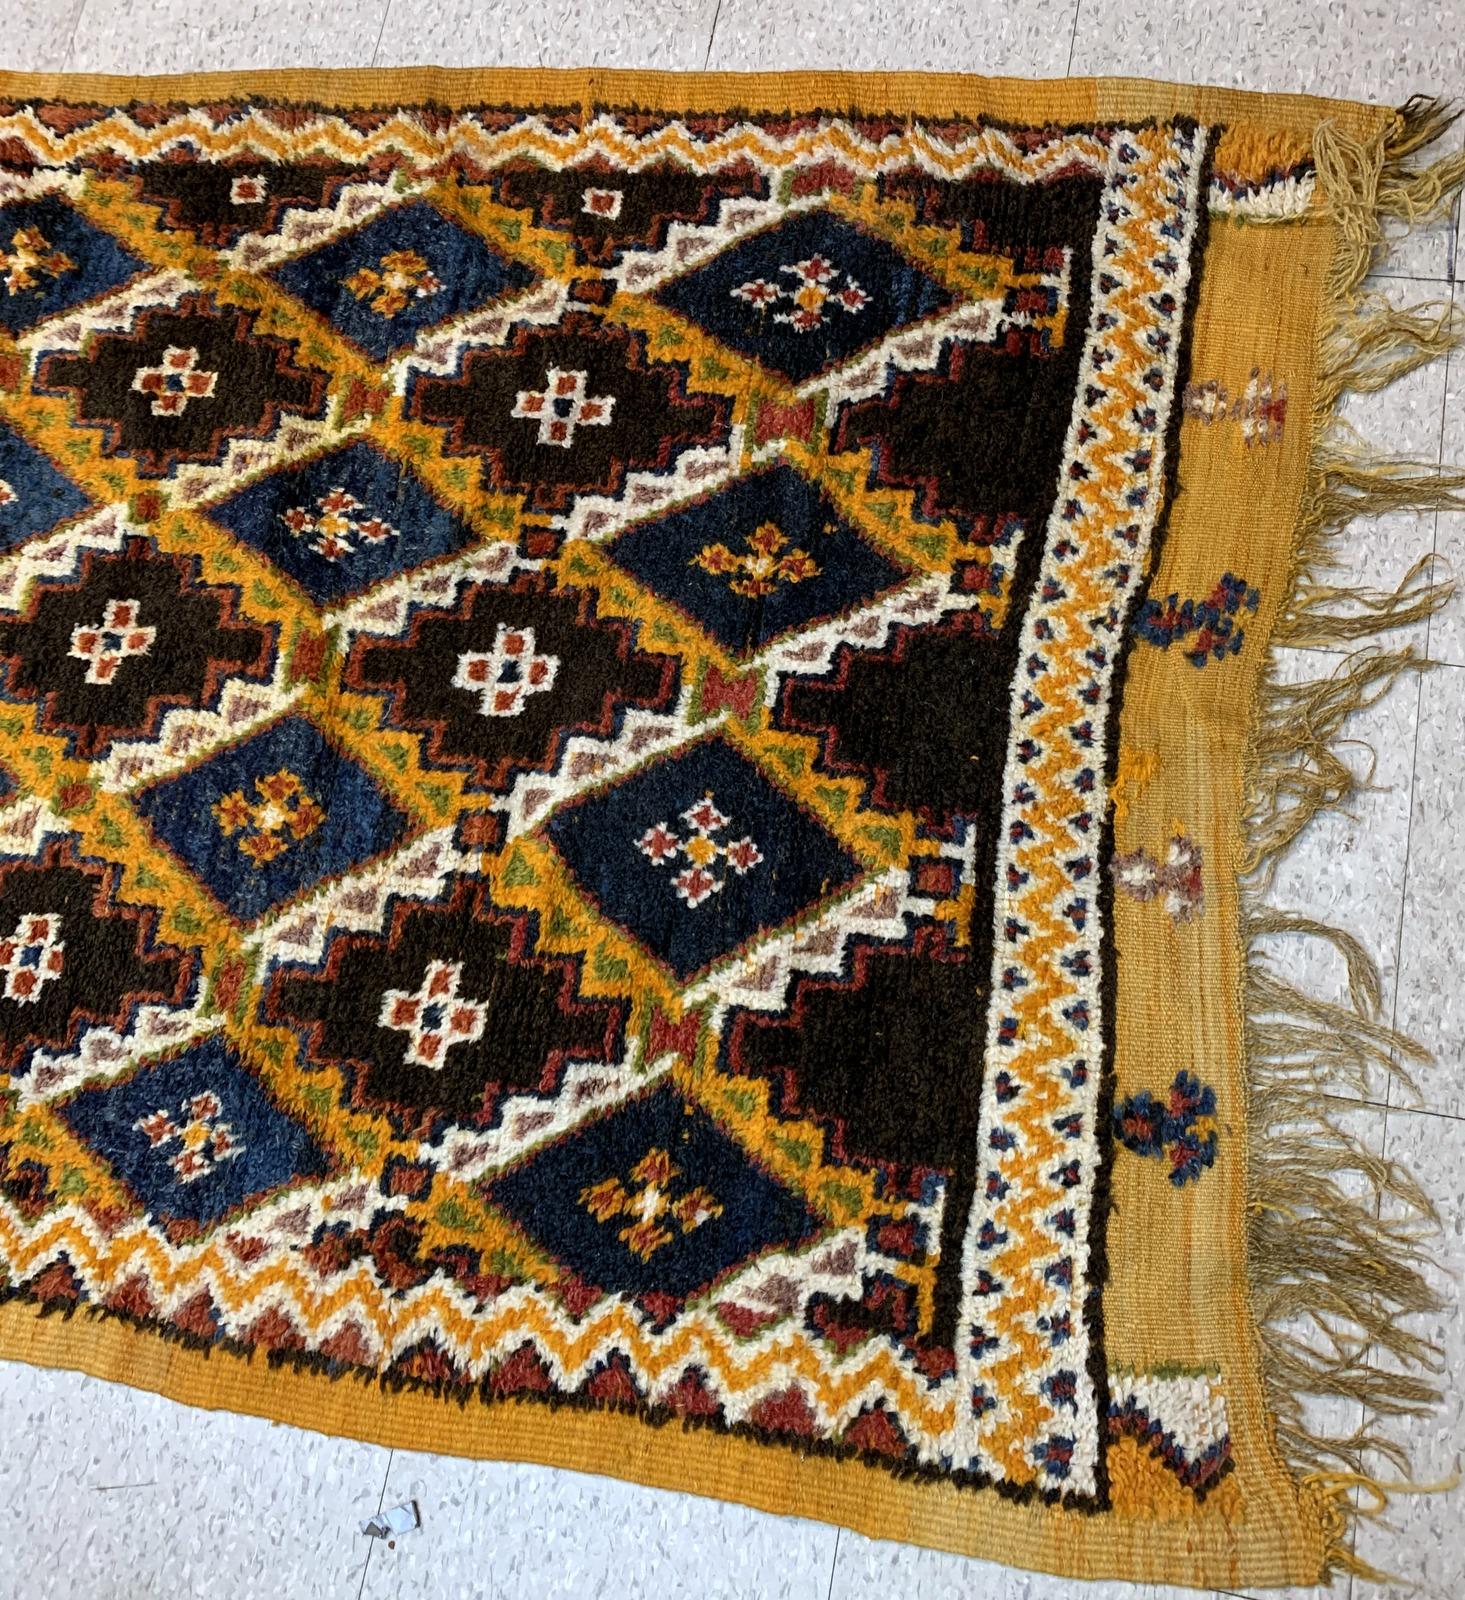 Handmade antique Berber rug from Morocco in original good condition. The rug is in geometric design from the end of 19th century.

-condition: original good,

-circa: 1880s,

-size: 4.5' x 7.2' (137cm x 219cm),

-material: wool,

-country